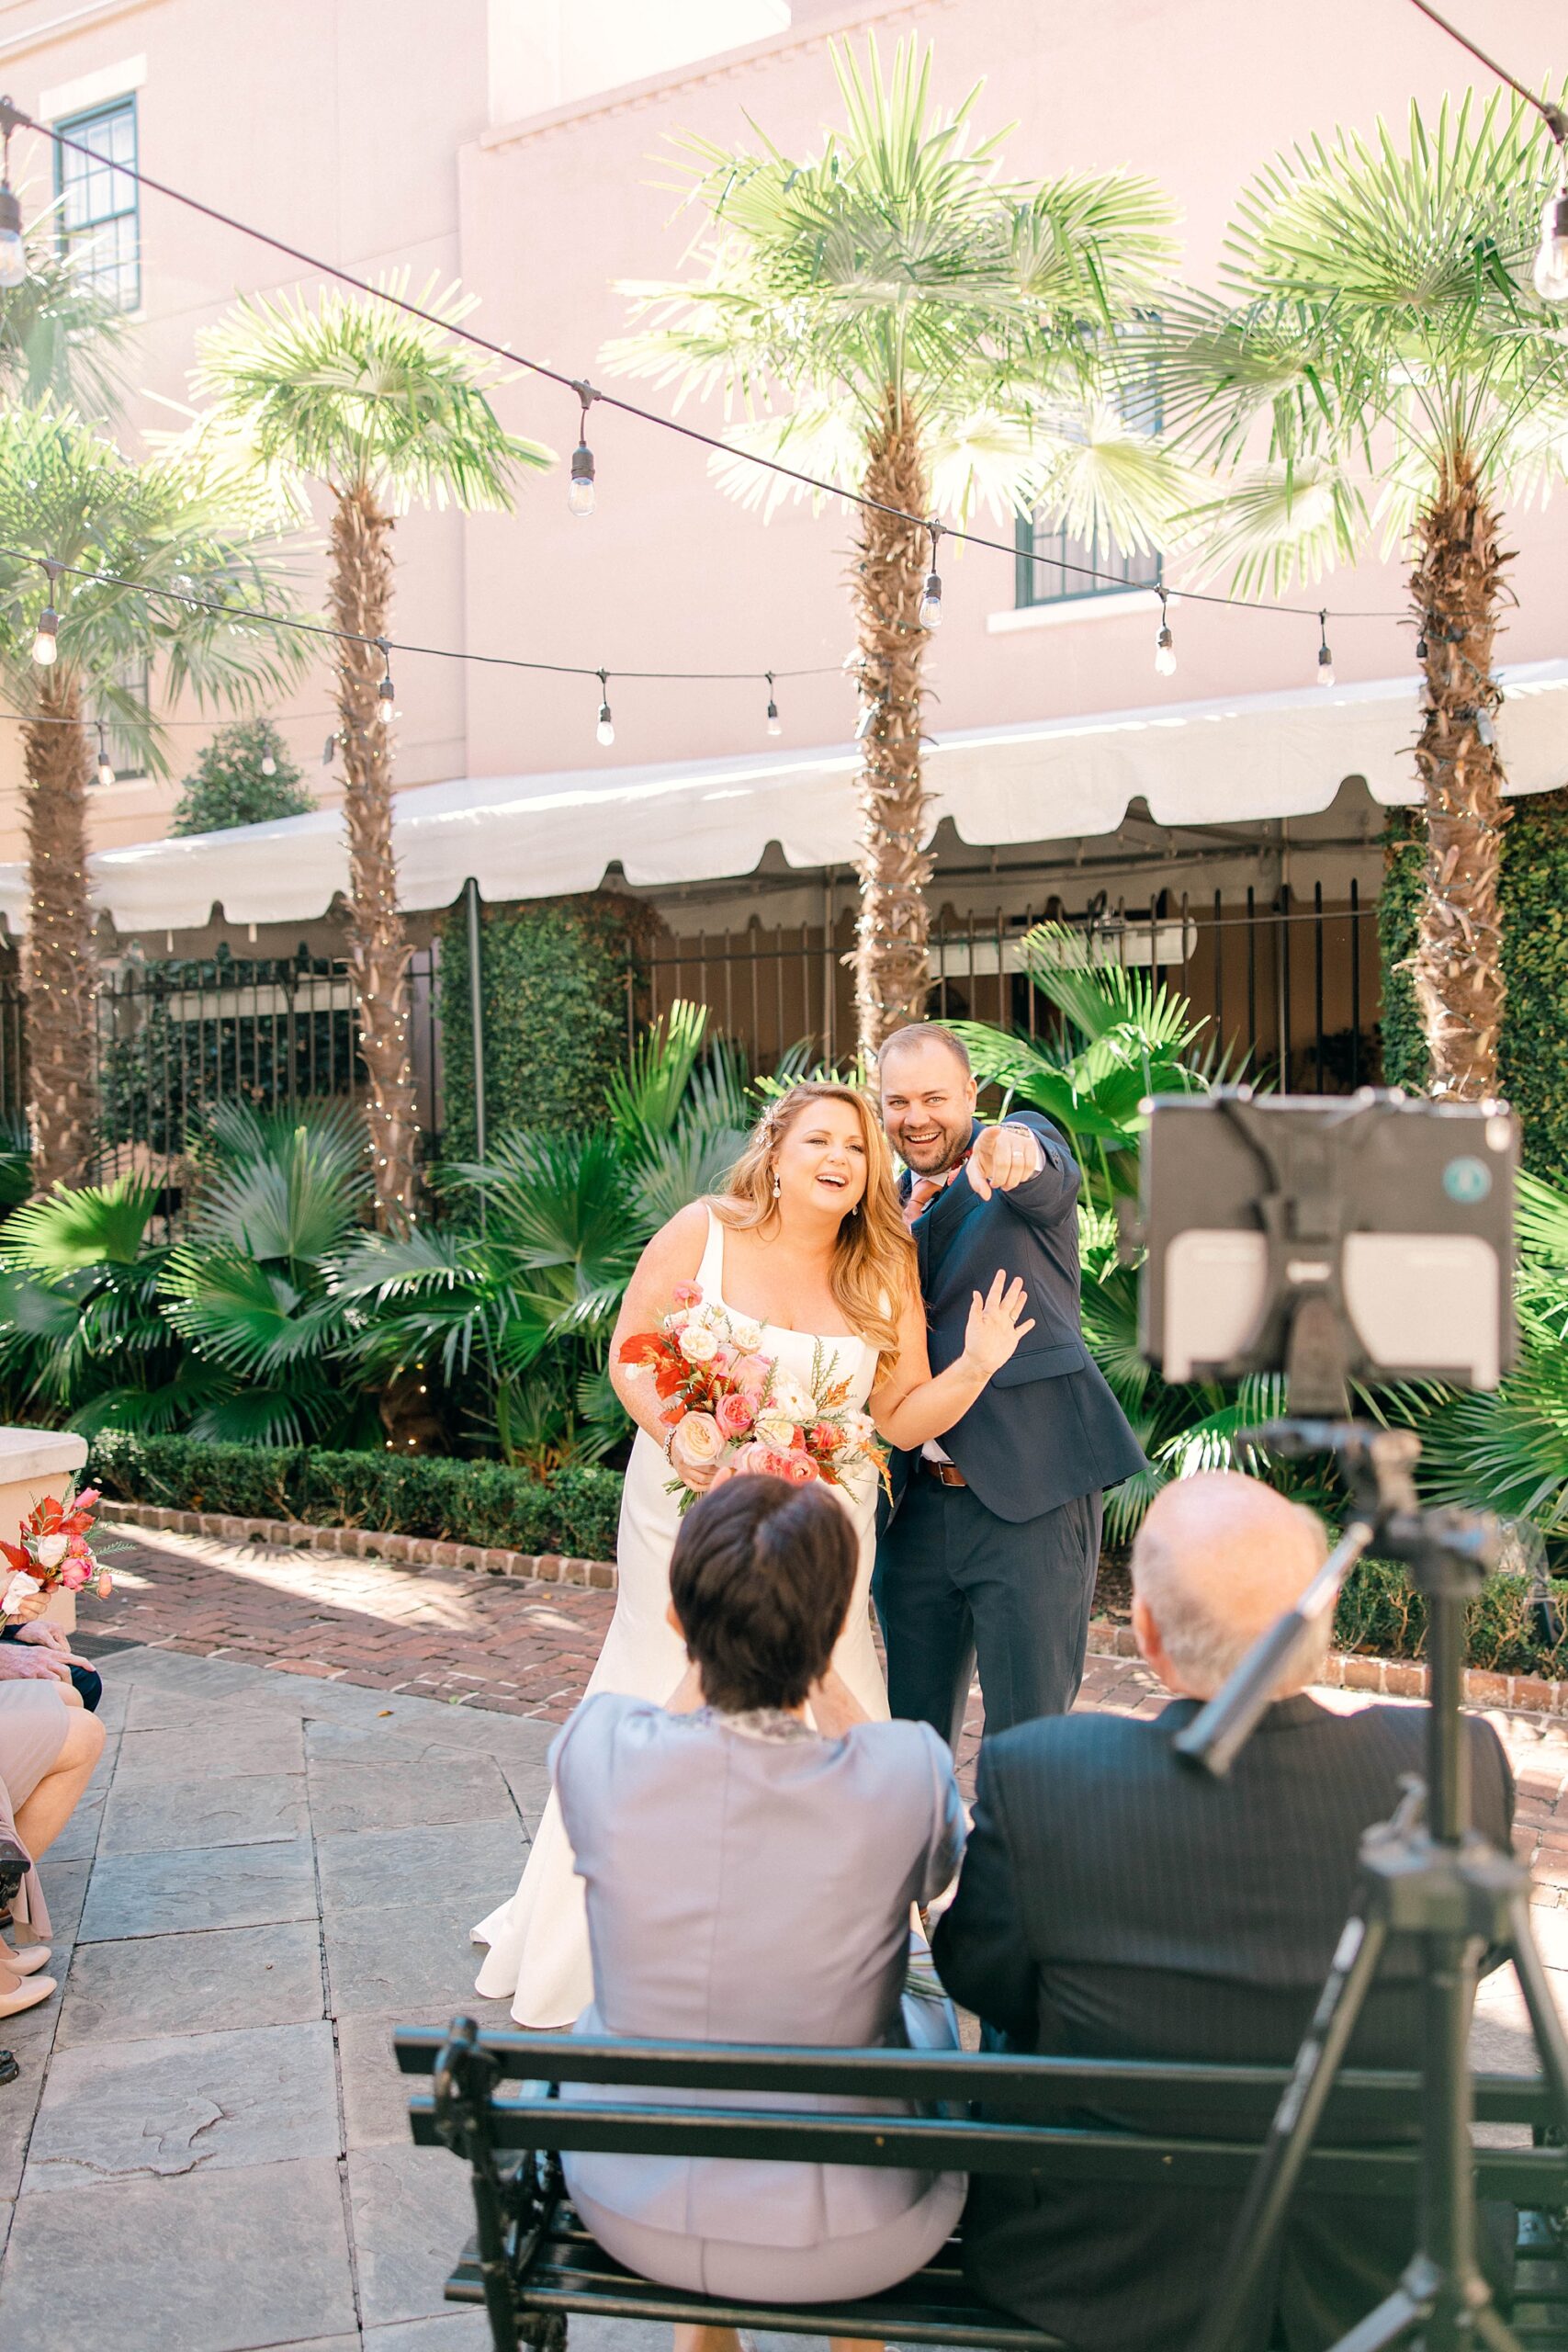 newlyweds show off rings to parents during intimate Planter's Inn wedding ceremony 